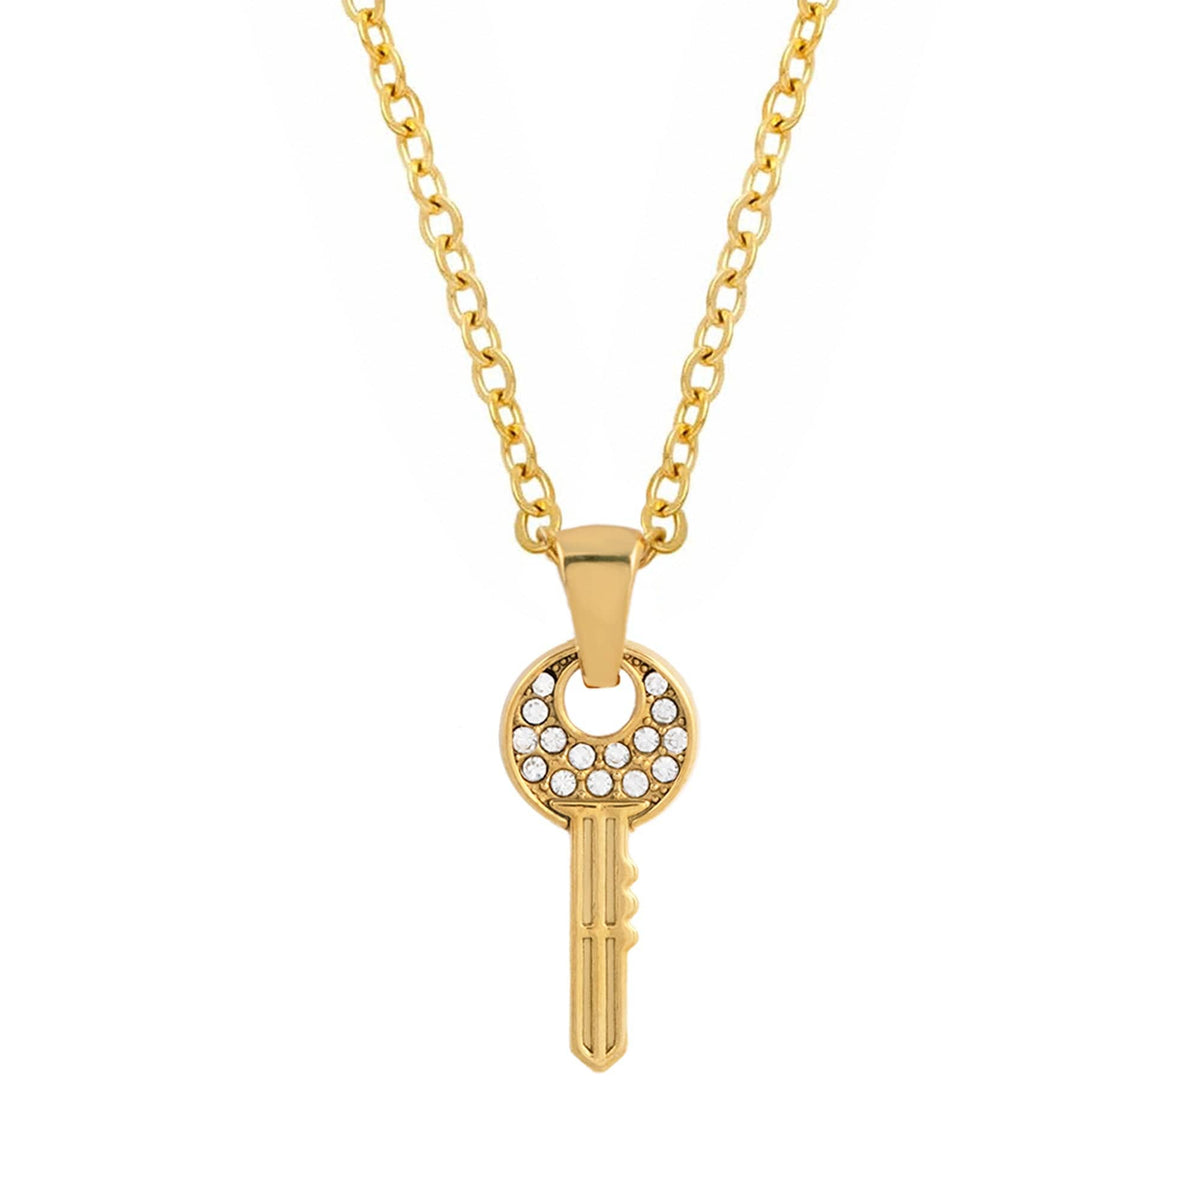 BohoMoon Stainless Steel Tabitha Necklace Gold